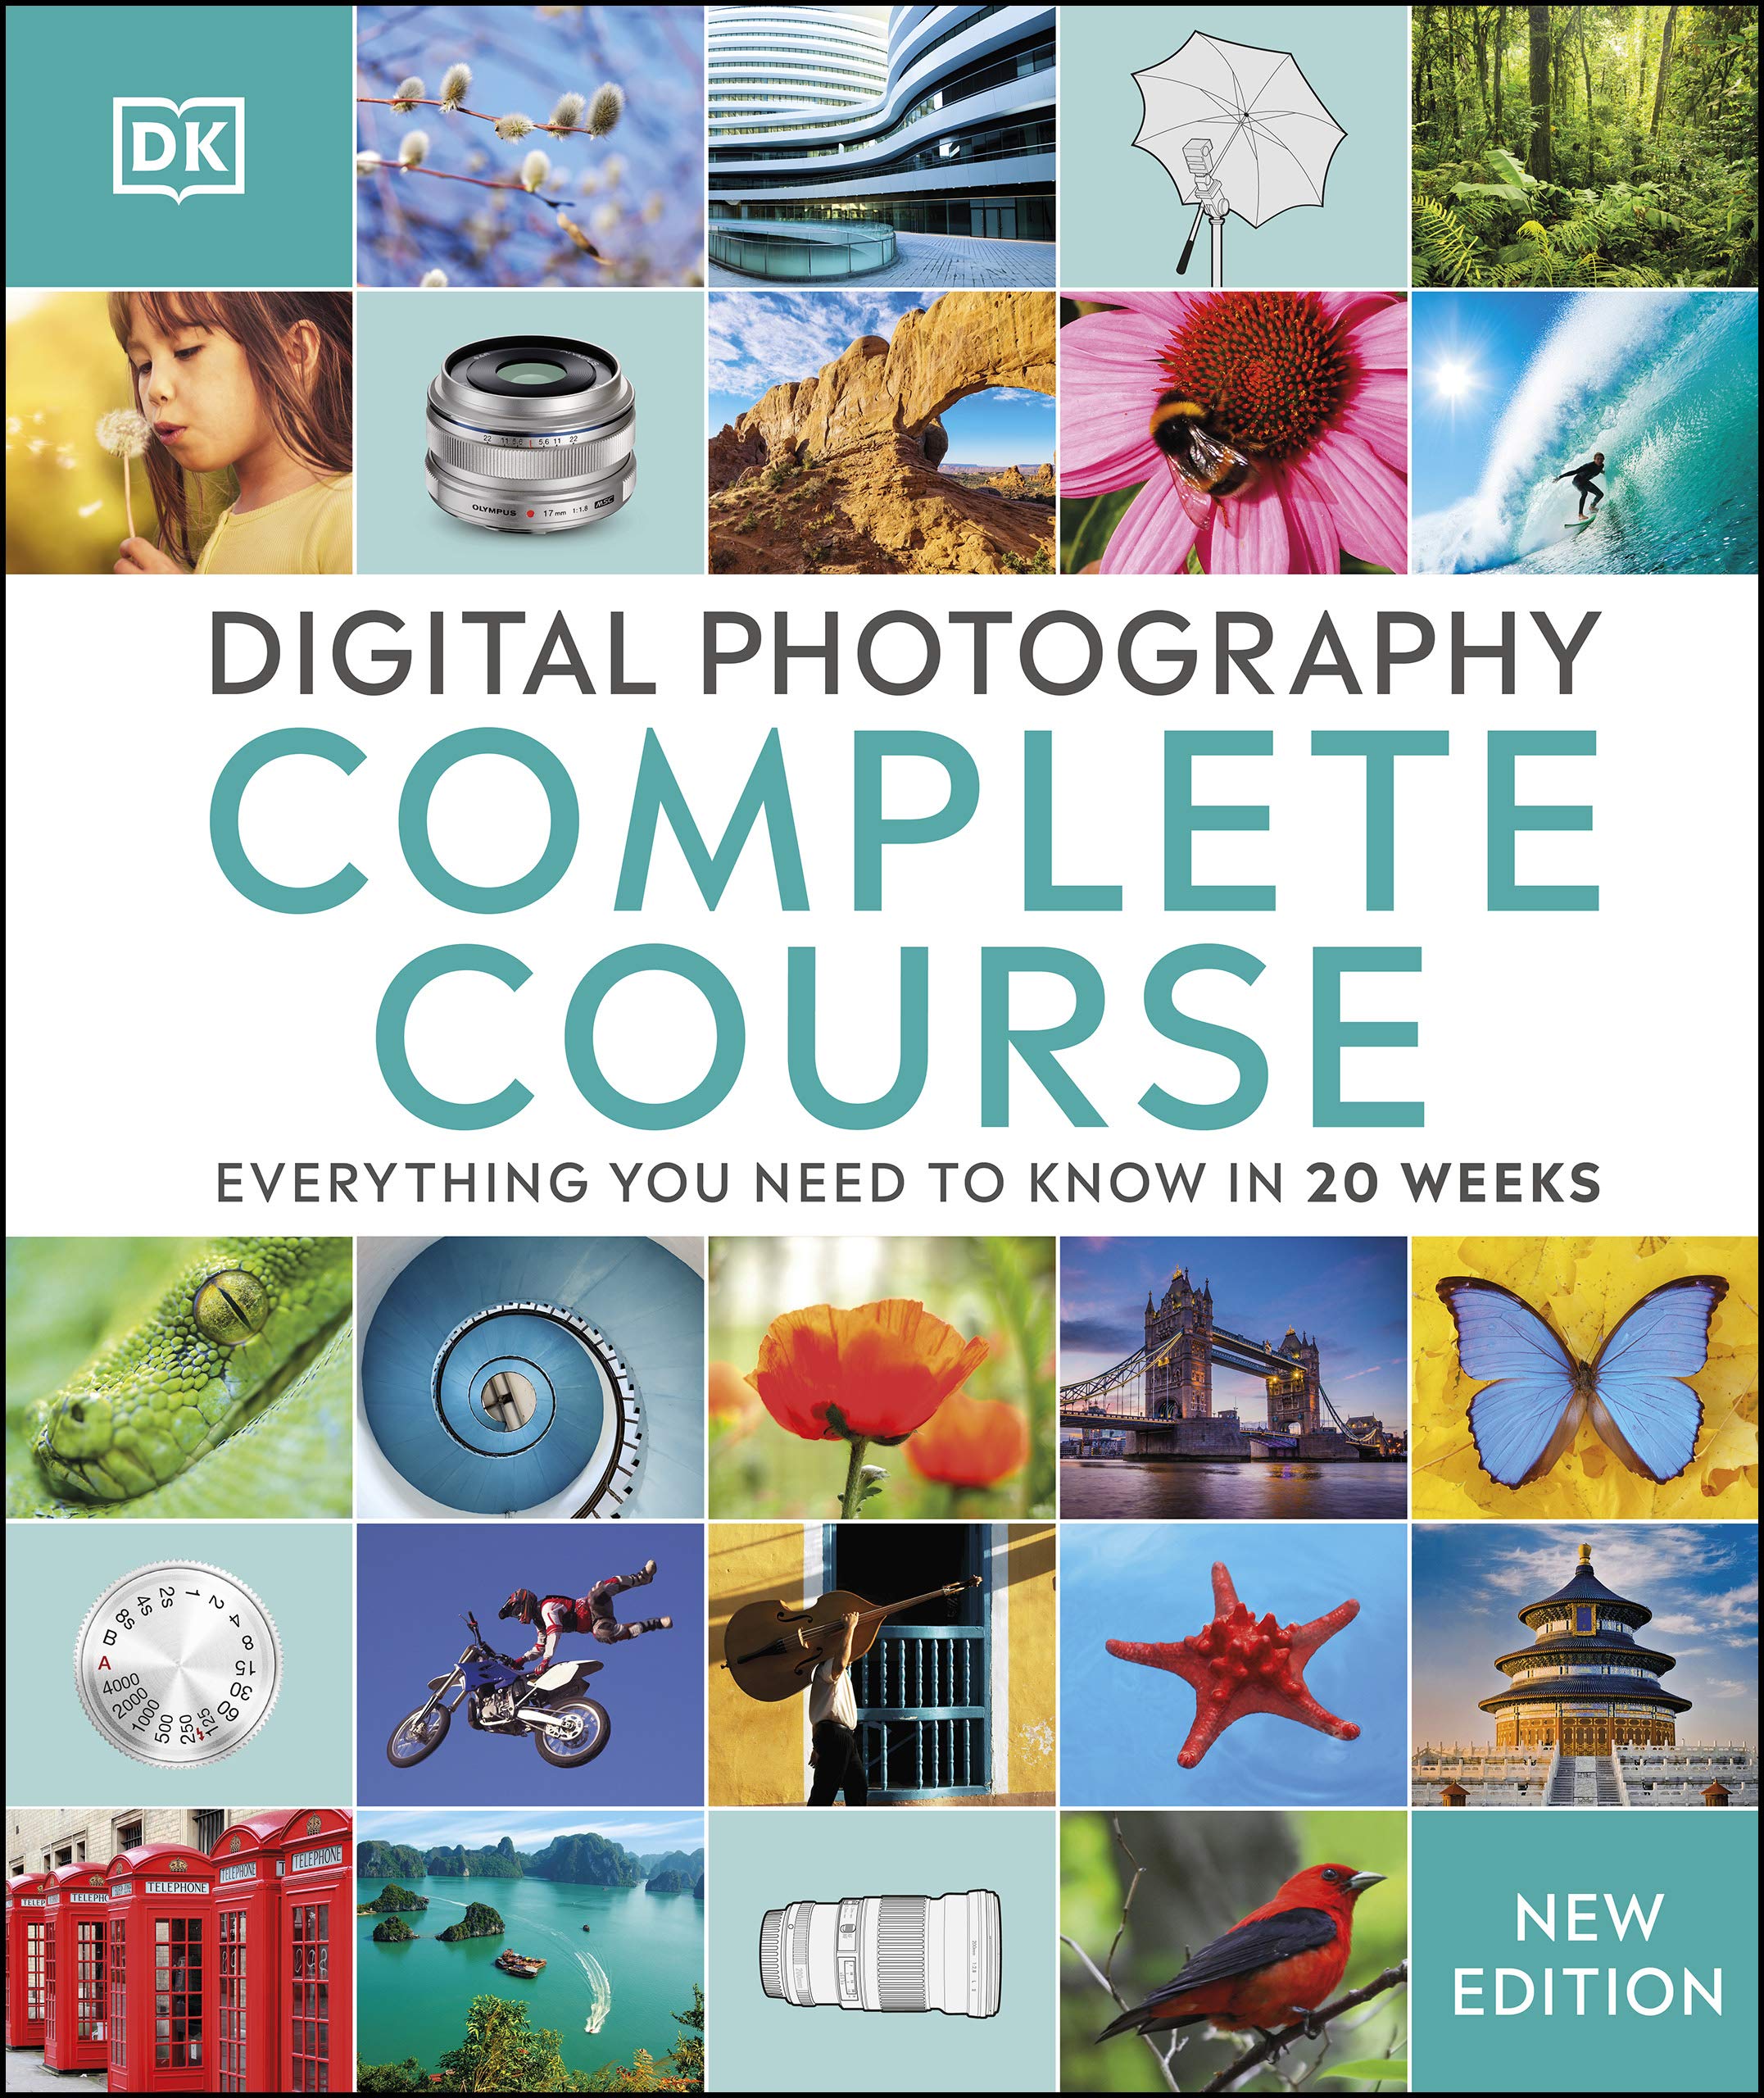 Digital Photography Complete Course: Learn Everything You Need to Know in 20 Weeks (DK Complete Courses) (eBook) by DK $1.99